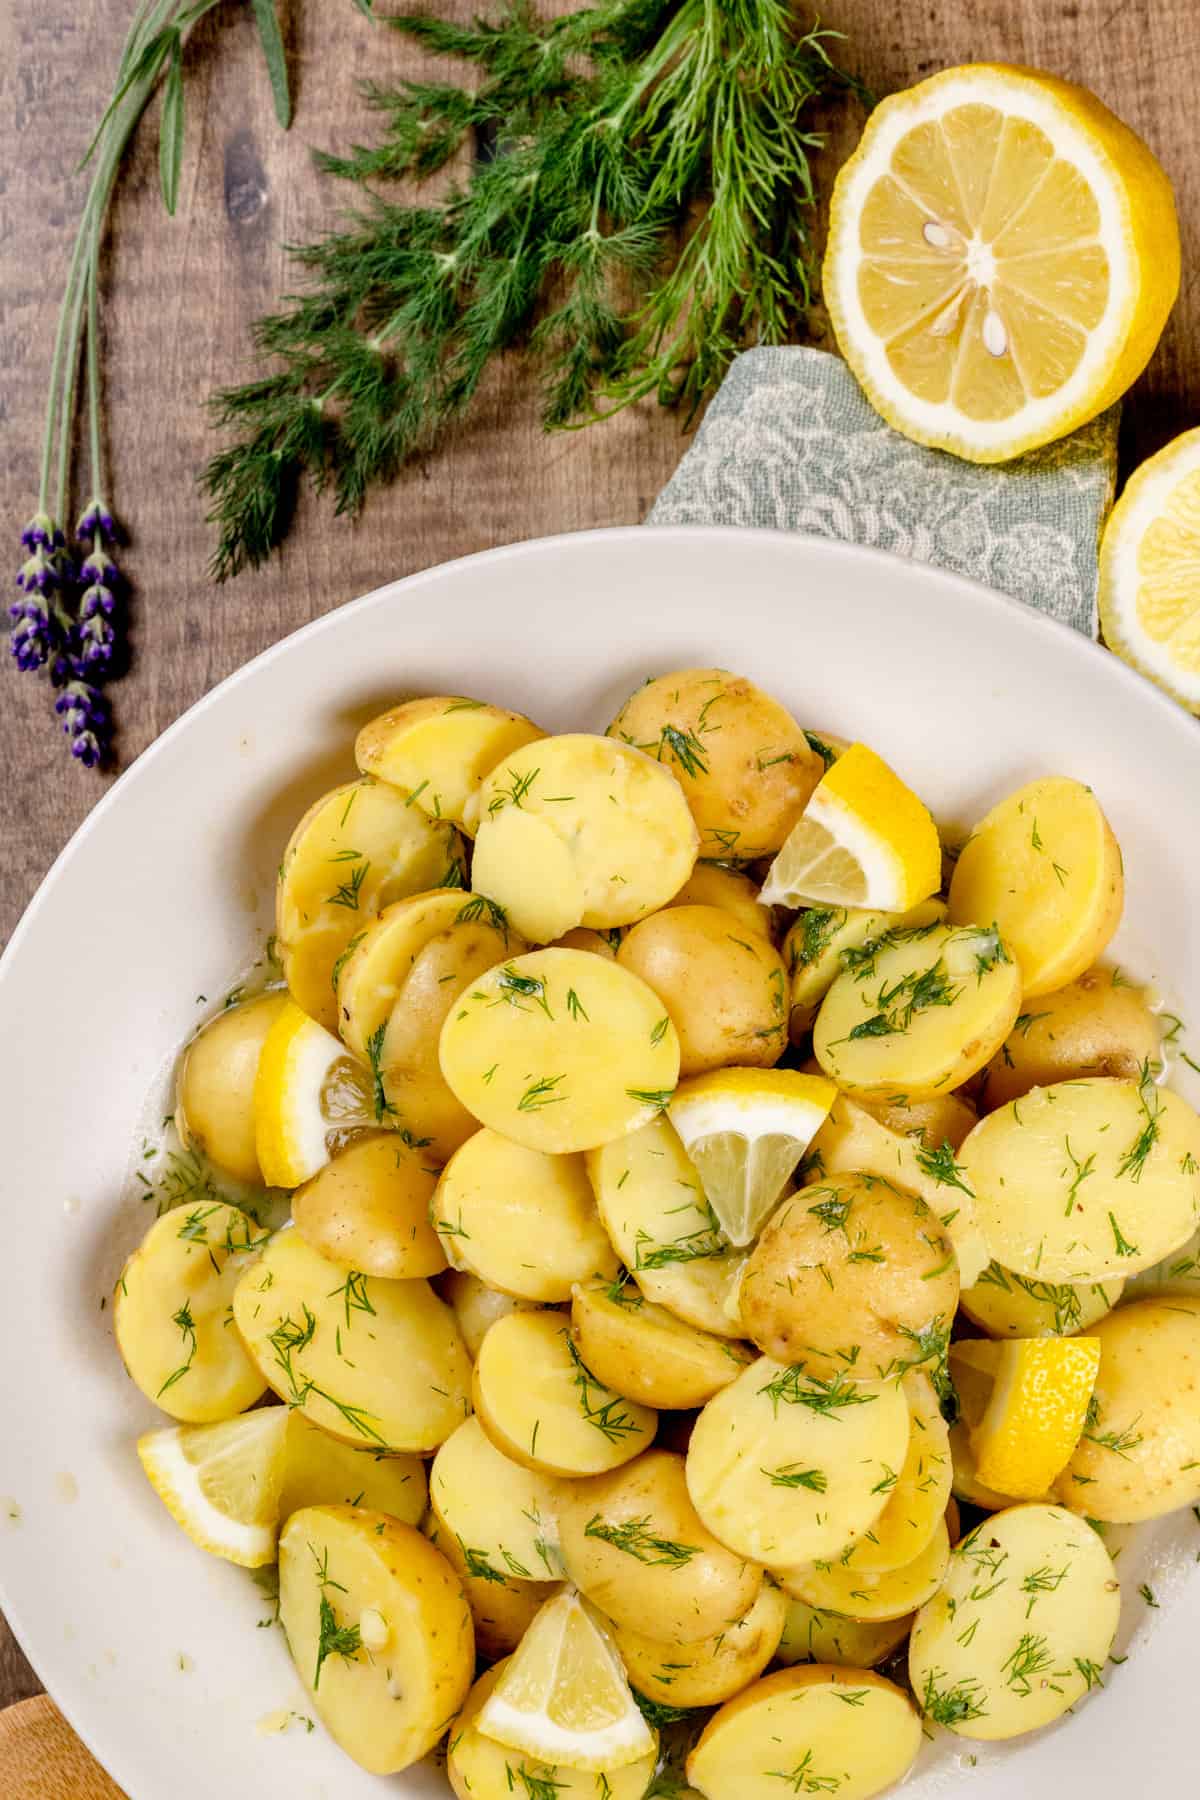 Closeup of a beige bowl filled with potato salad made without eggs. Fresh lemon wedges and slices are in and next to the bowl as well as fresh dill.